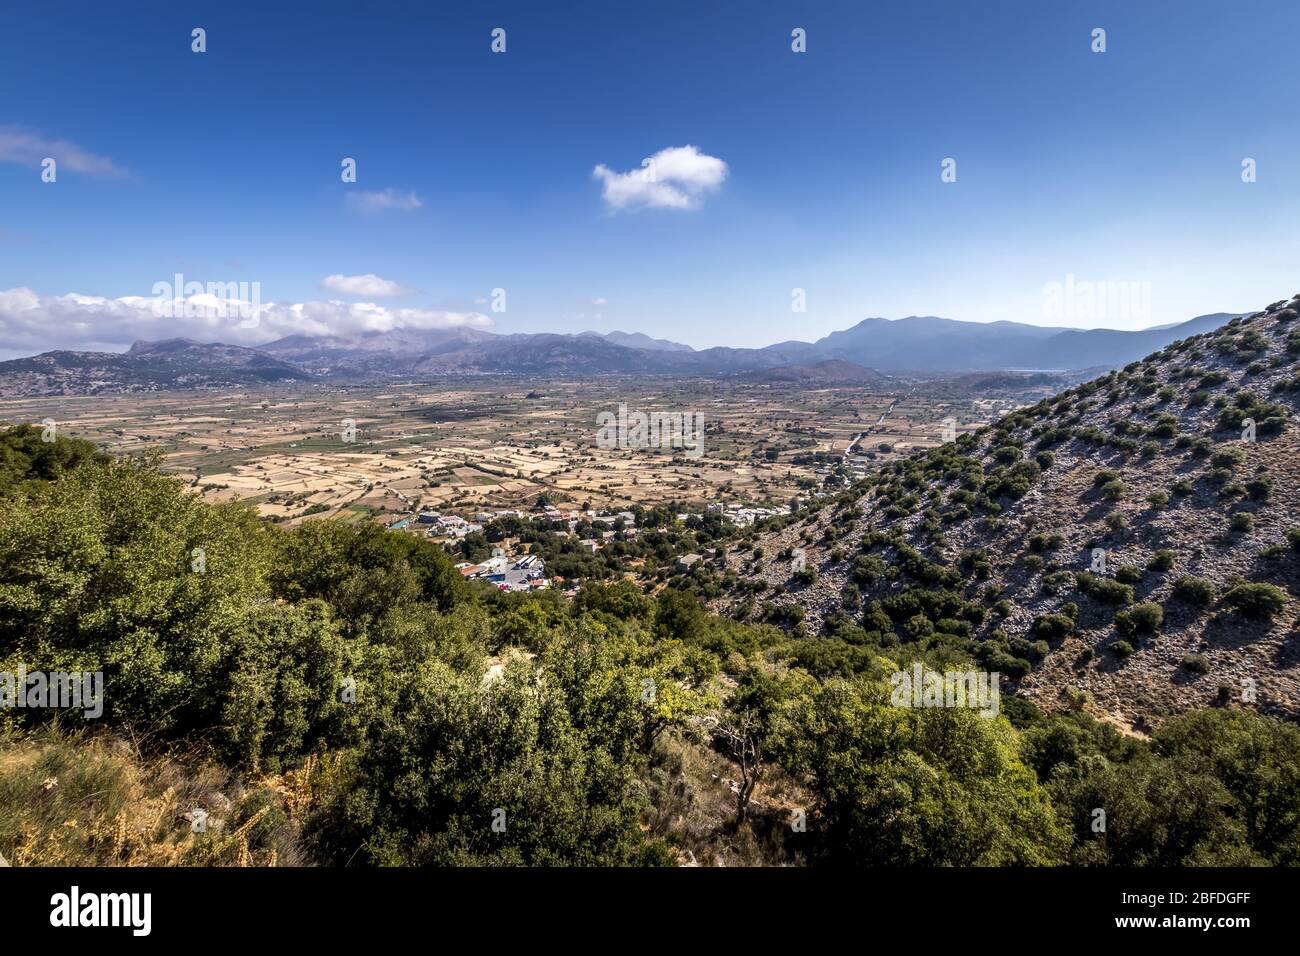 Top view of the Lassithi Plateau on a sunny clear day with trees in the foreground and a cloudy sky in the background. Crete island, Greece. Stock Photo